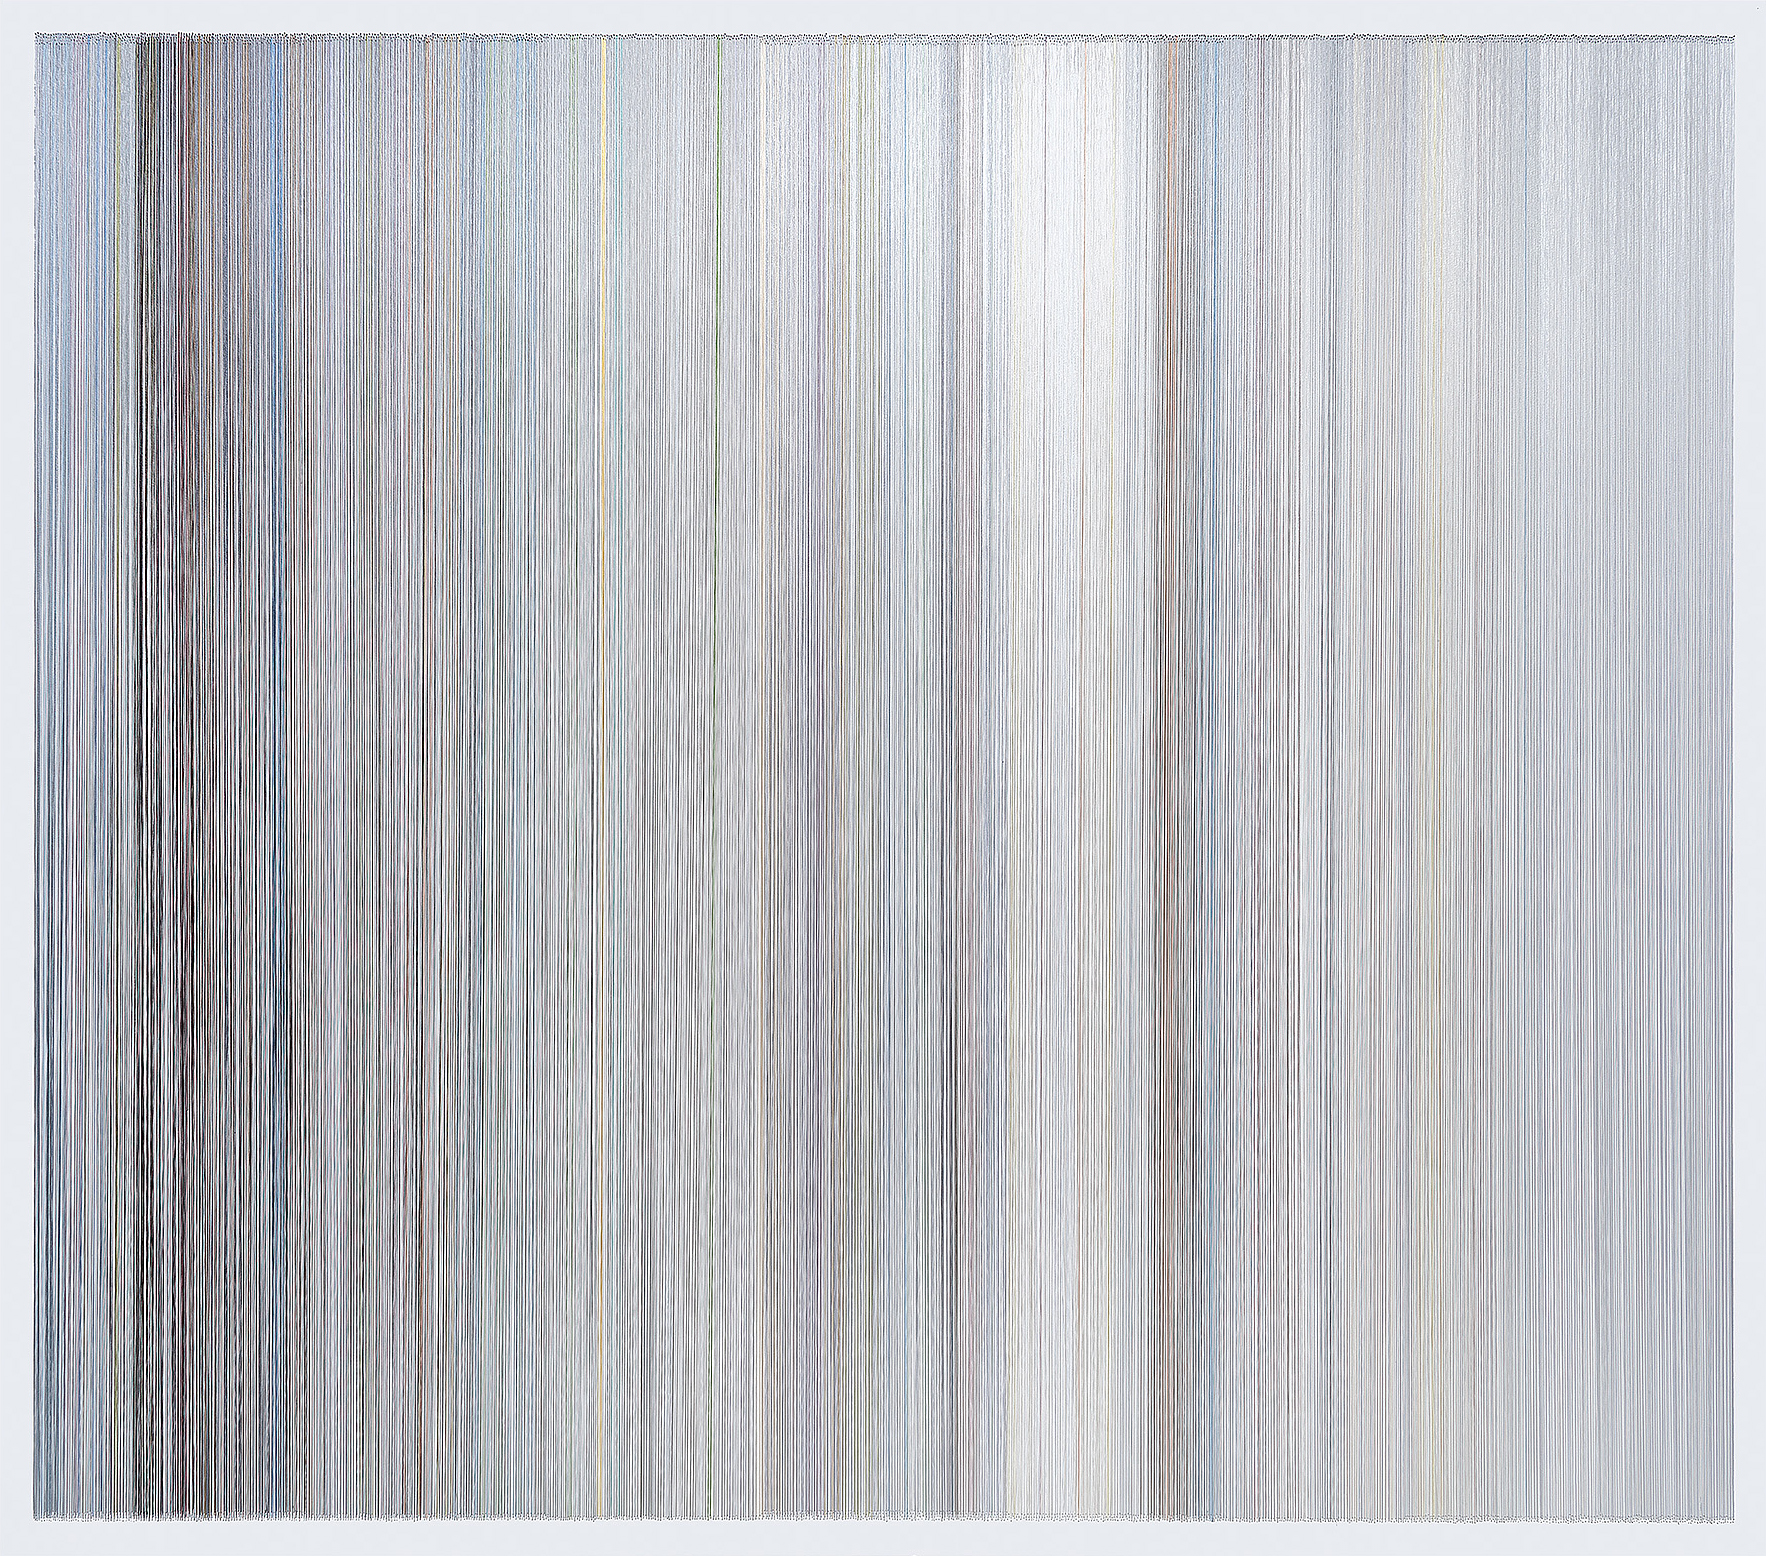    thread drawing 24   2013 rayon thread 51 x 58 inches Private Collection, Stanford, California 